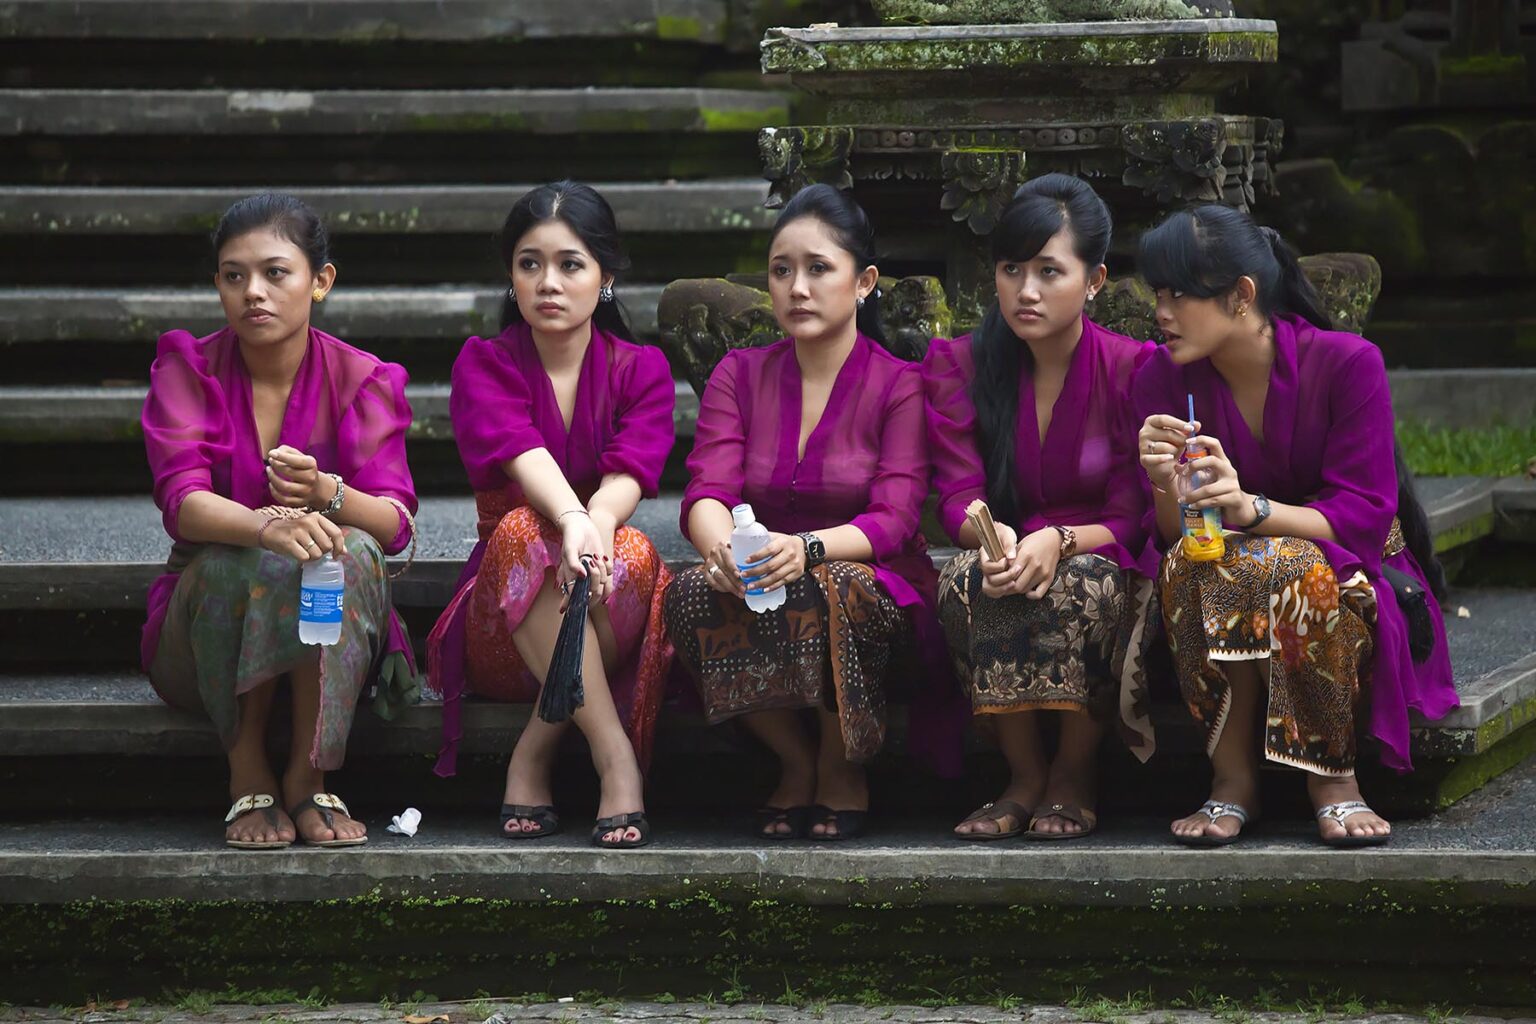 Relatives participate in a Hindu style CREMATION - UBUD, BALI, INDONESIA